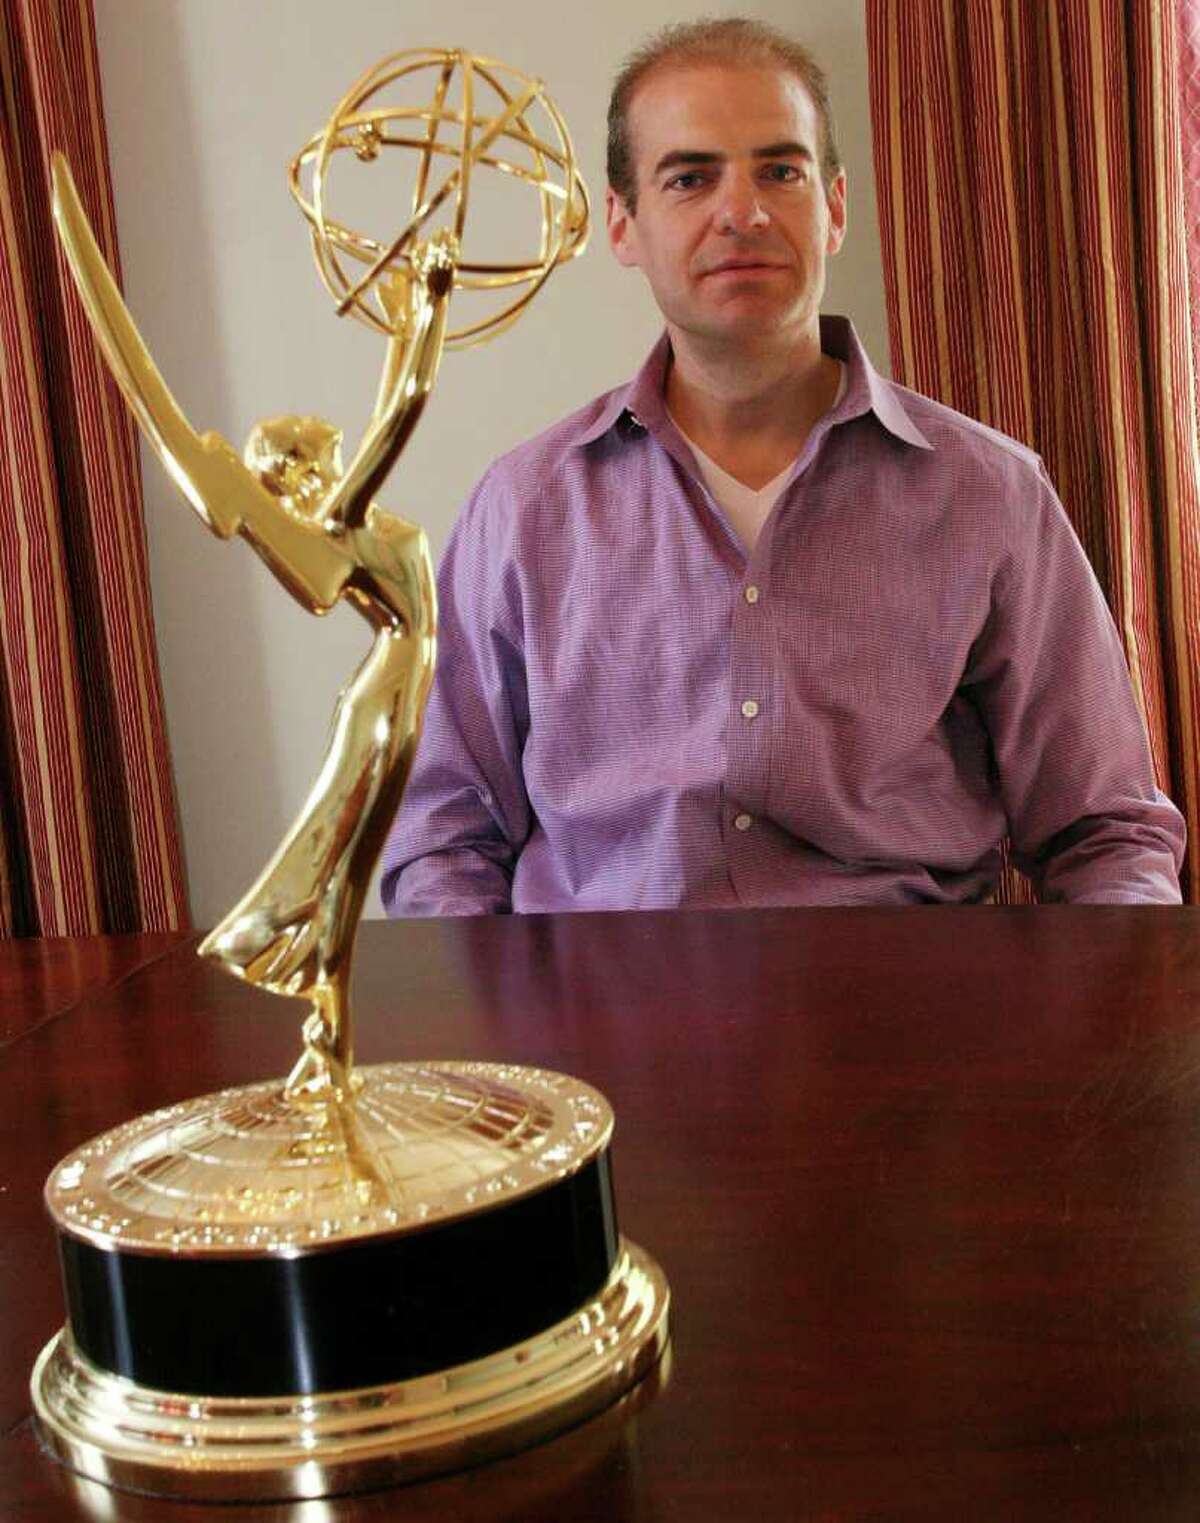 Longtime Greenwich resident Thomas Odelfelt seen here Friday, May 27, 2011, with the Sports Emmy he won last year for editing the program "24/7 Mayweather-Marquez." The Brunswick graduate recently won another sports Emmy this year in the Outstanding Edited Specials category for the program "24/7 Penquins-Capitals: Road to the NHL Winter Classic." That Emmy is being engraved.